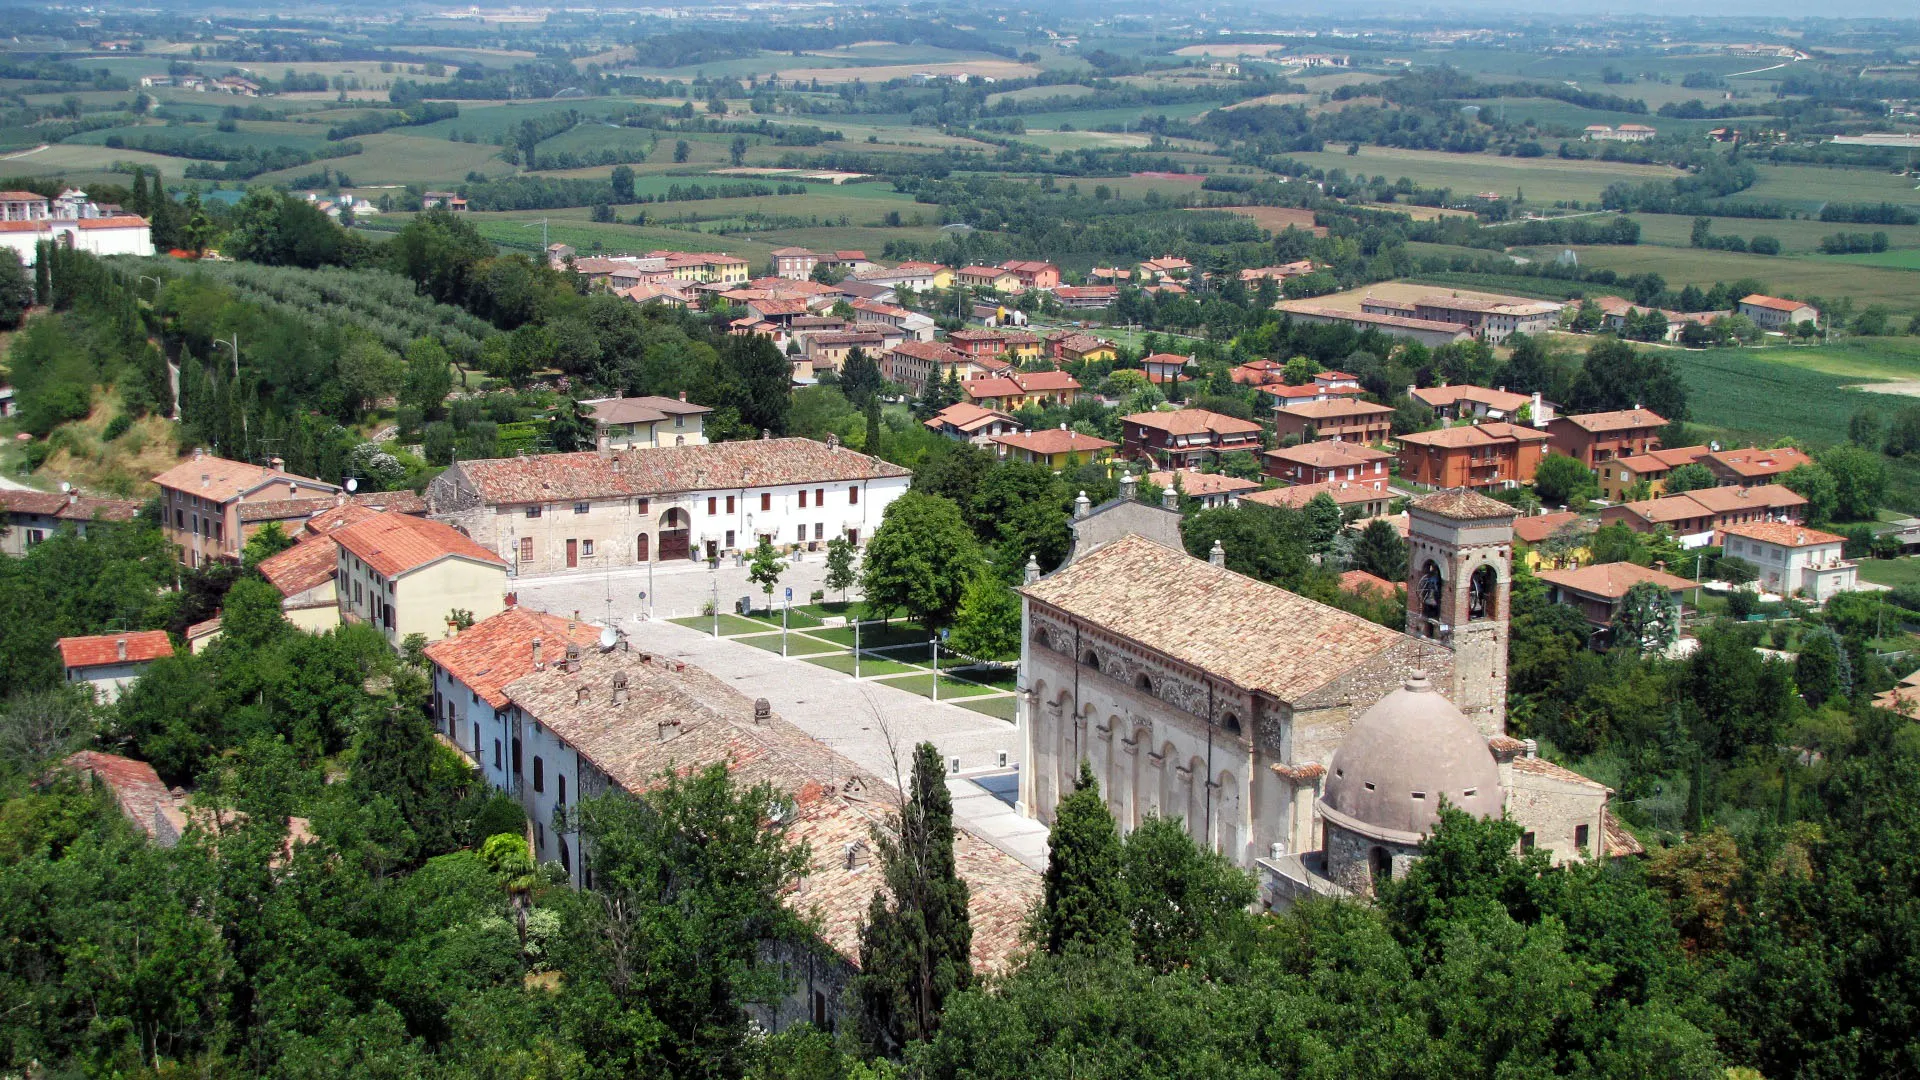 Photo showing: View of the town of Solferino and the church of San Pietro in Vincoli, Lombardy, Italy. Solferino was the place of the battle of the same name, which was the trigger for the Swiss Henry Dunant to found what is now known as the Red Cross.